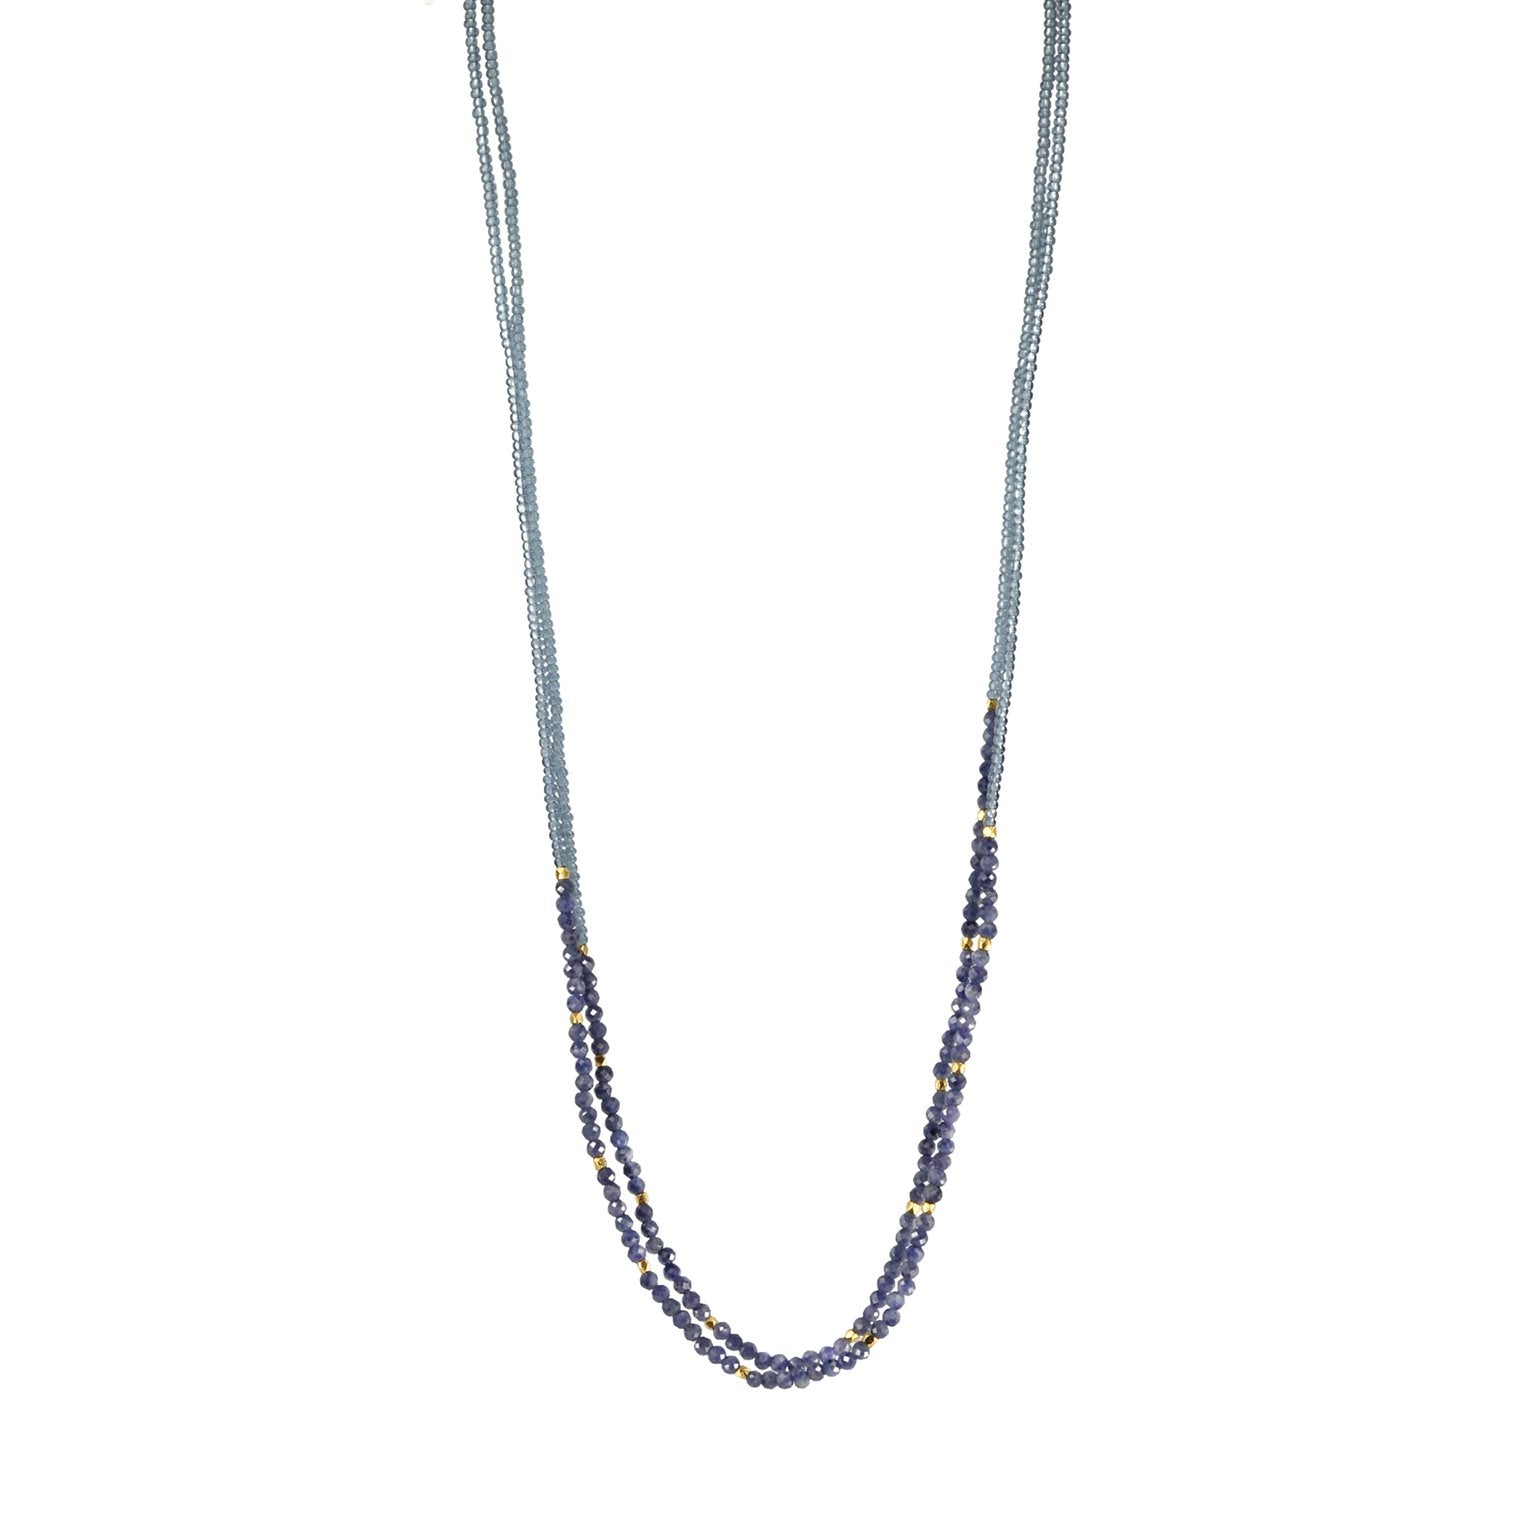 Debbie Fisher Grey Seed Bead Long Necklace with Two Grey Sapphire Beaded Stations